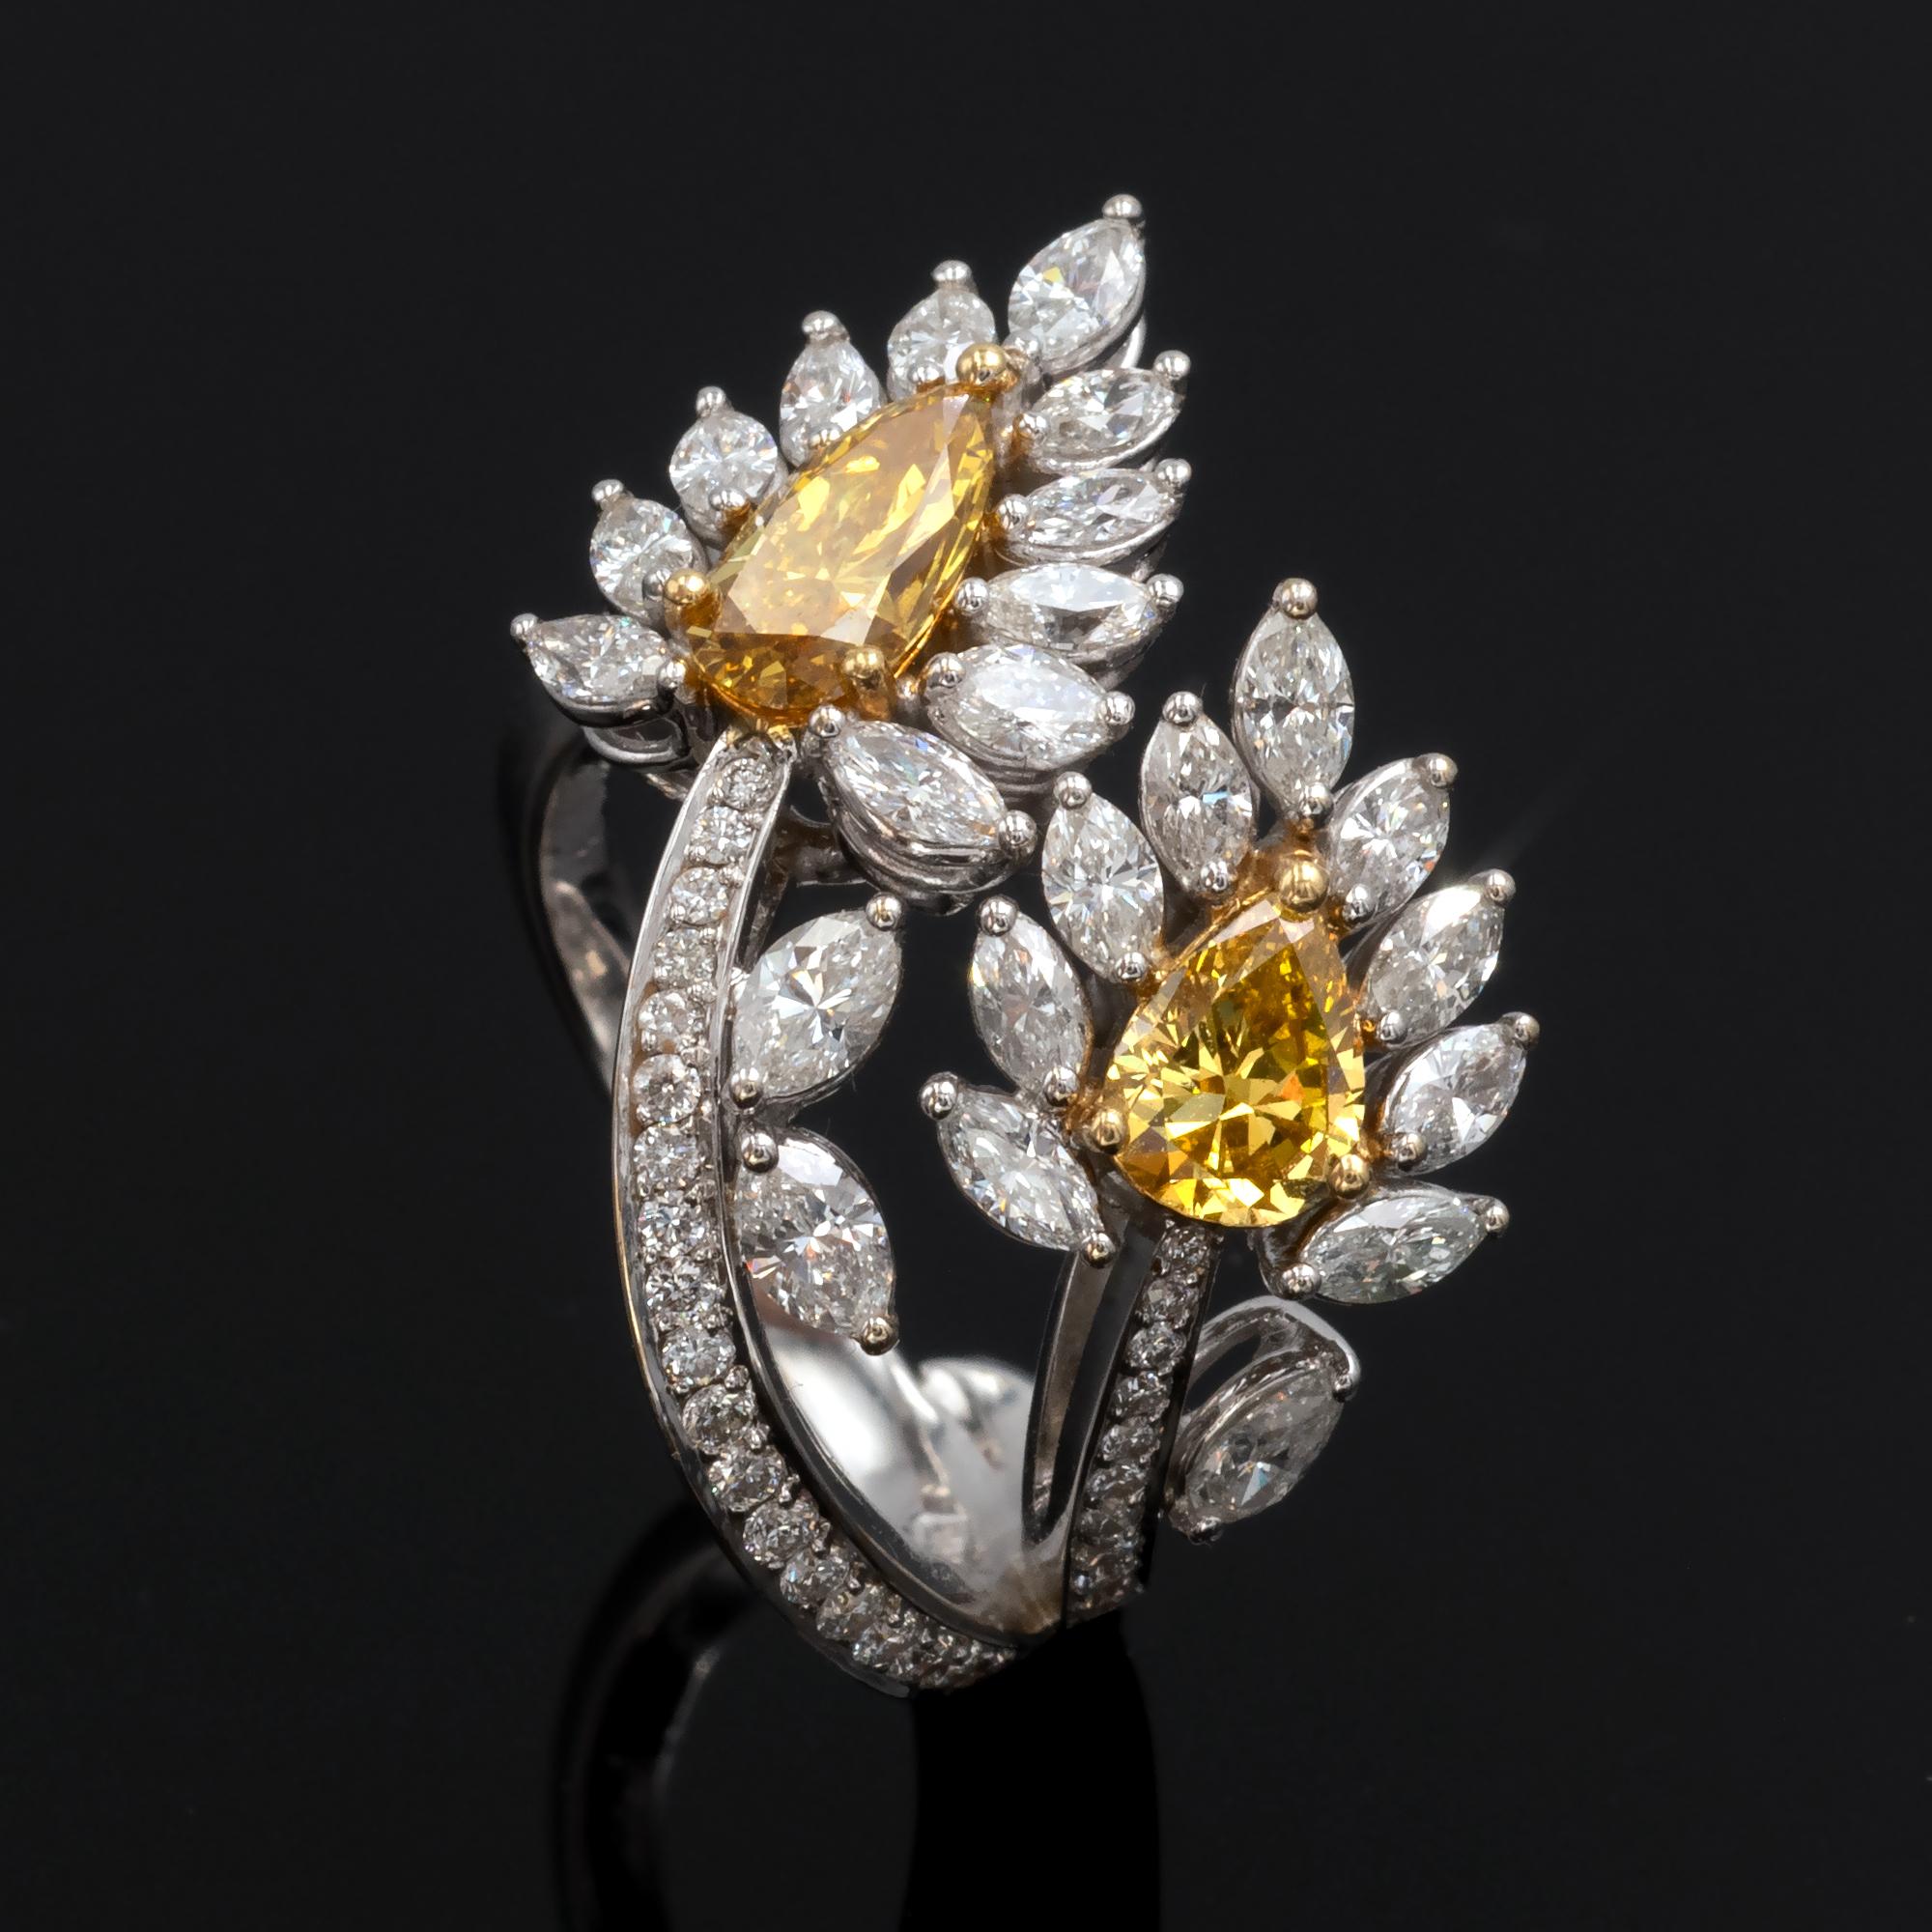 Exquisite ring with a delicate design and outstanding make consisting of two 18KT white gold spikes set with diamonds wraping around the finger.  

The two center stones are pear shapes very intense yellow fancy diamonds weighing 1,22 carat.